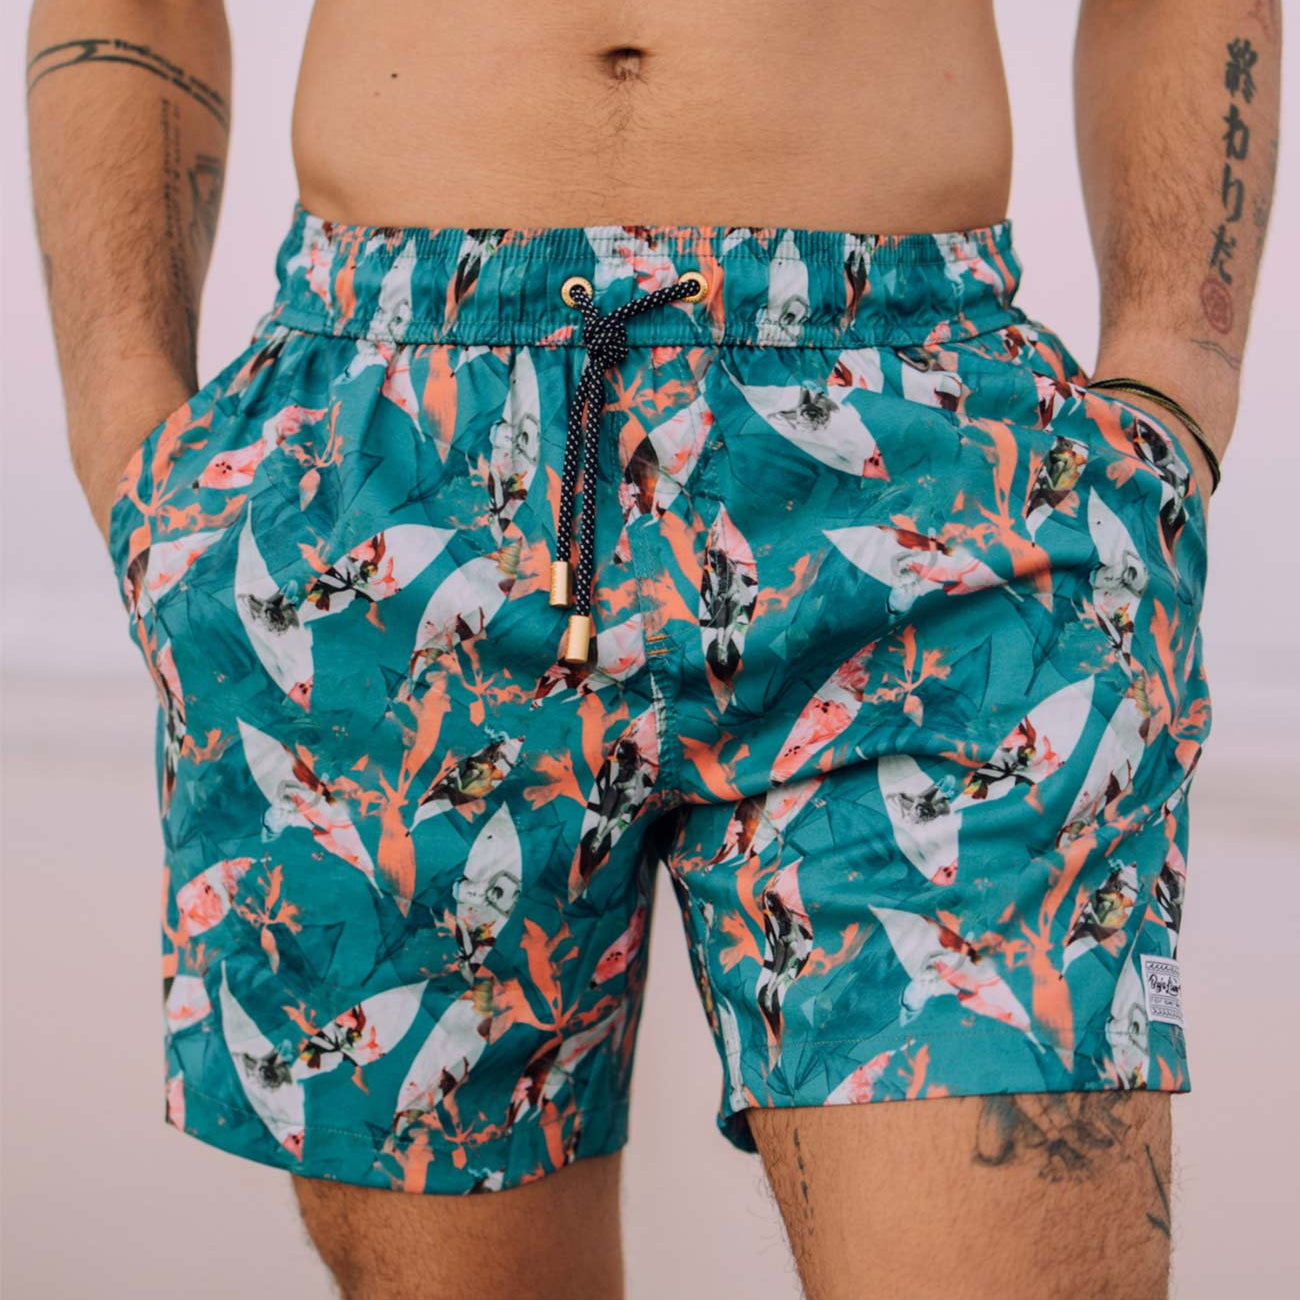 Turquoise floral men's volley shorts with retro print of woman surfing.